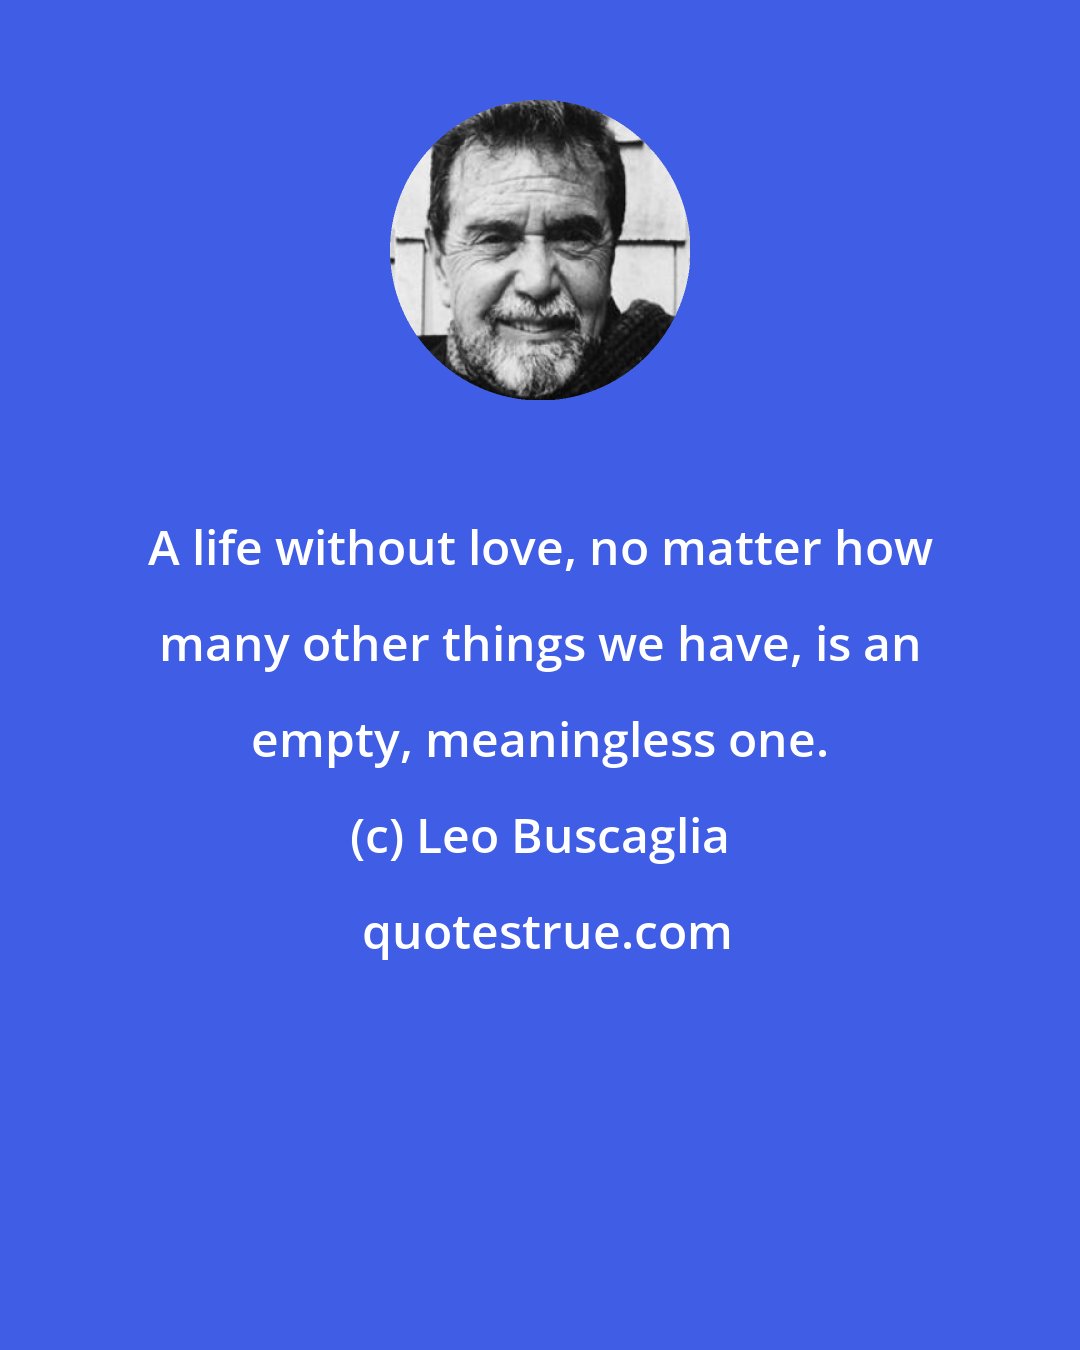 Leo Buscaglia: A life without love, no matter how many other things we have, is an empty, meaningless one.